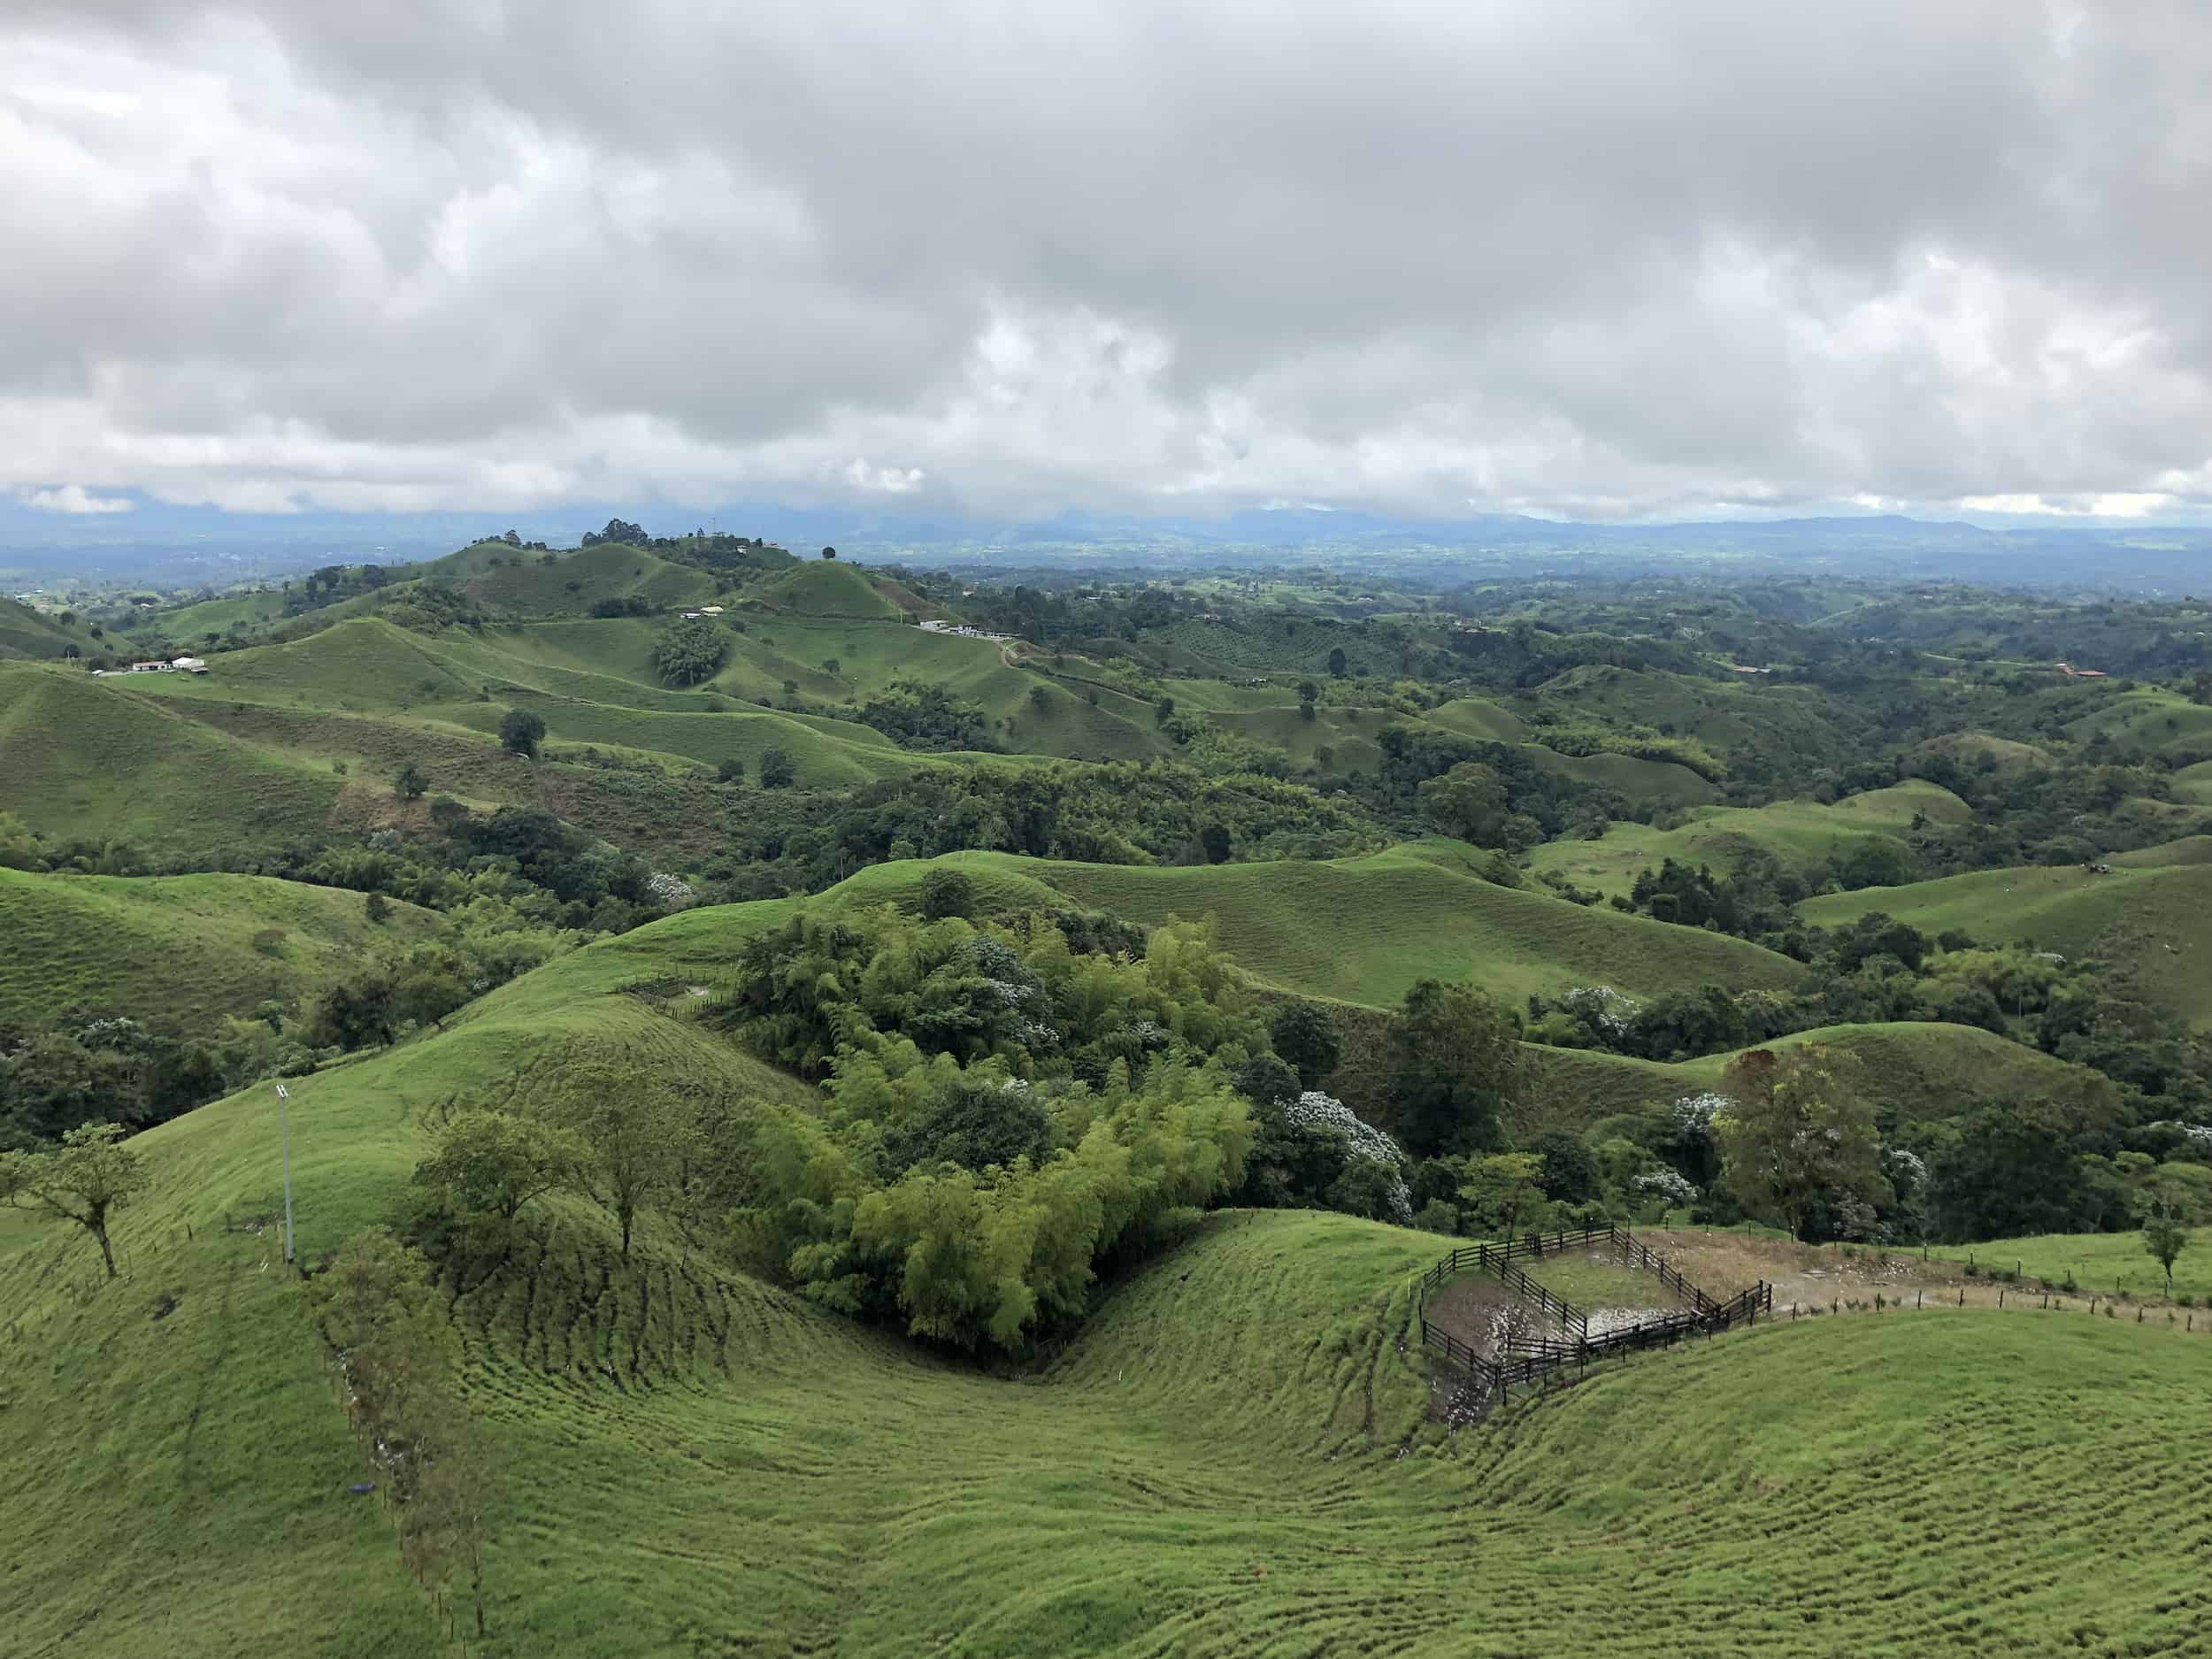 Looking at the rolling green hills from the Mirador Colina Iluminada in Filandia, Quindío, Colombia